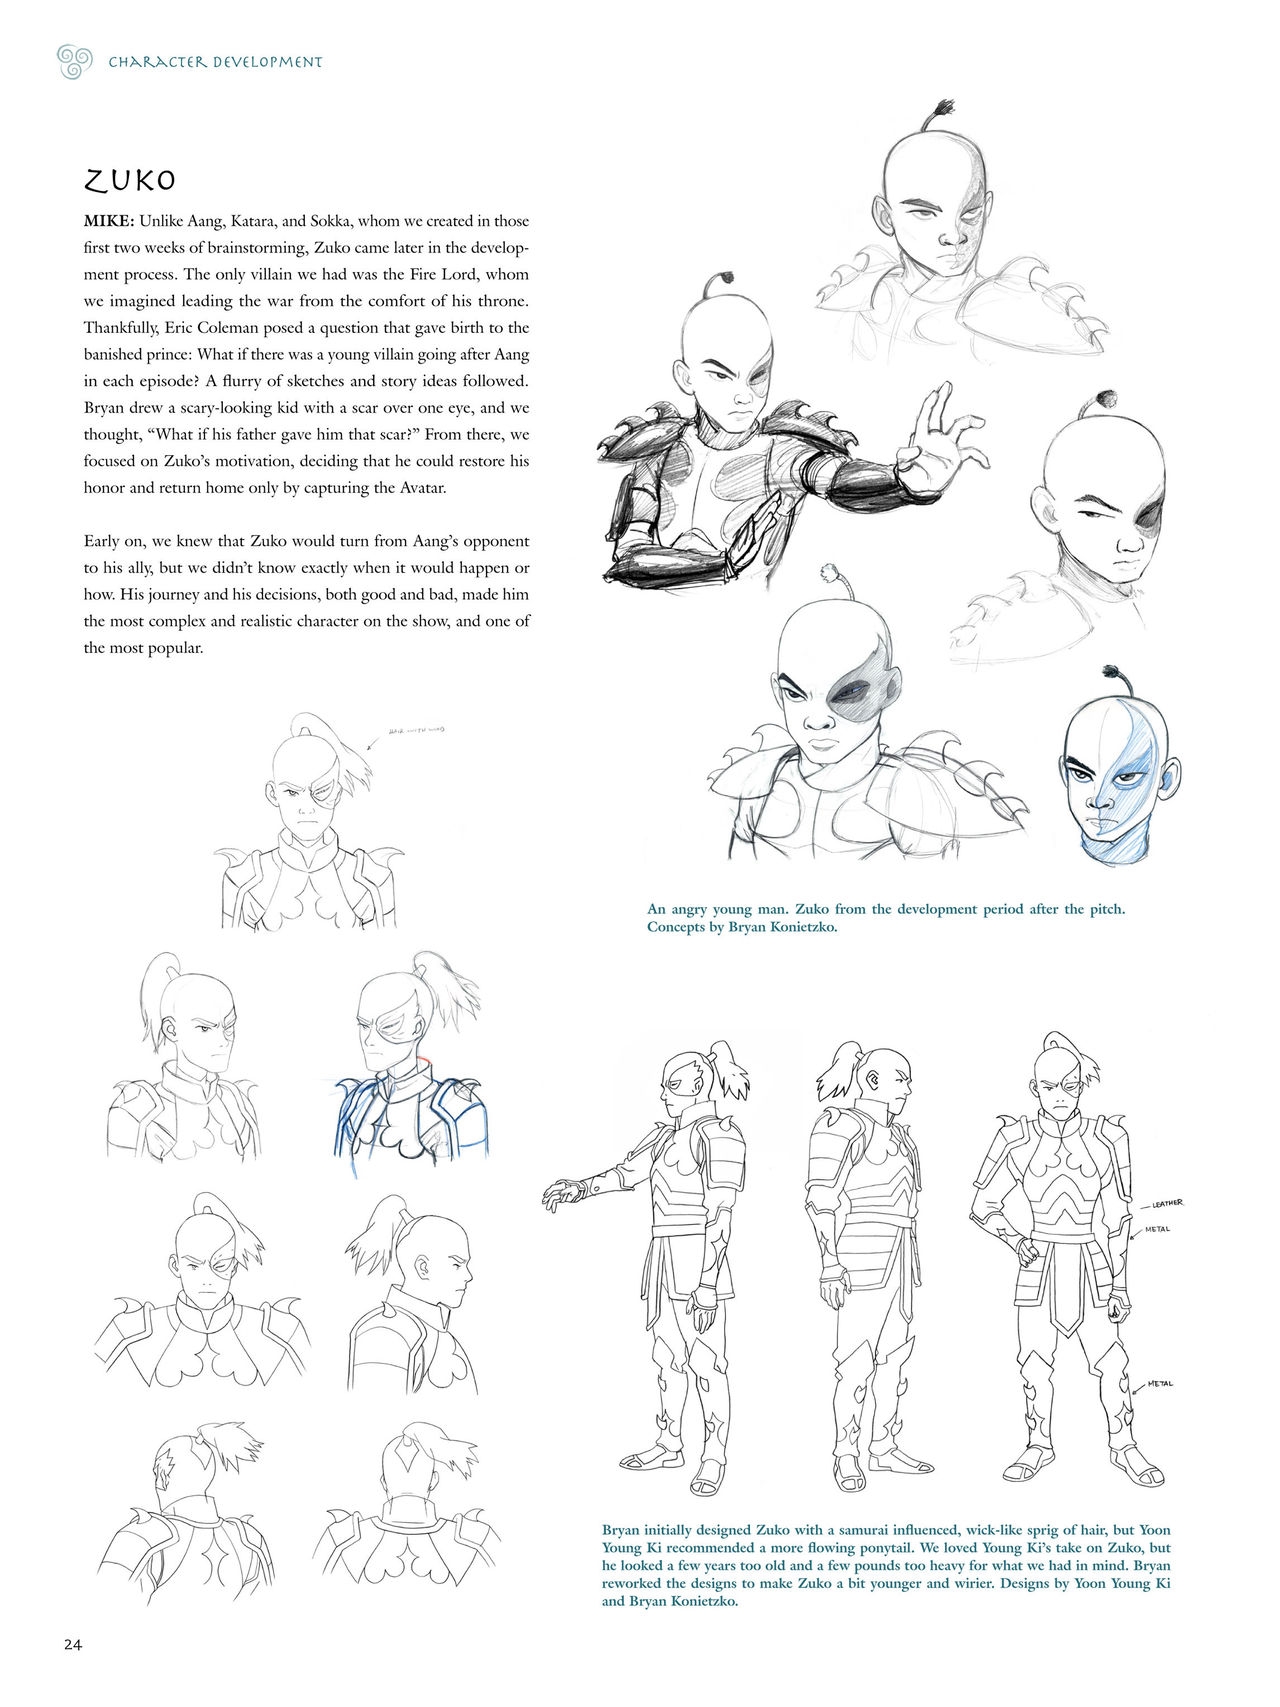 Avatar - The Last Airbender - The Art of the Animated Series 26